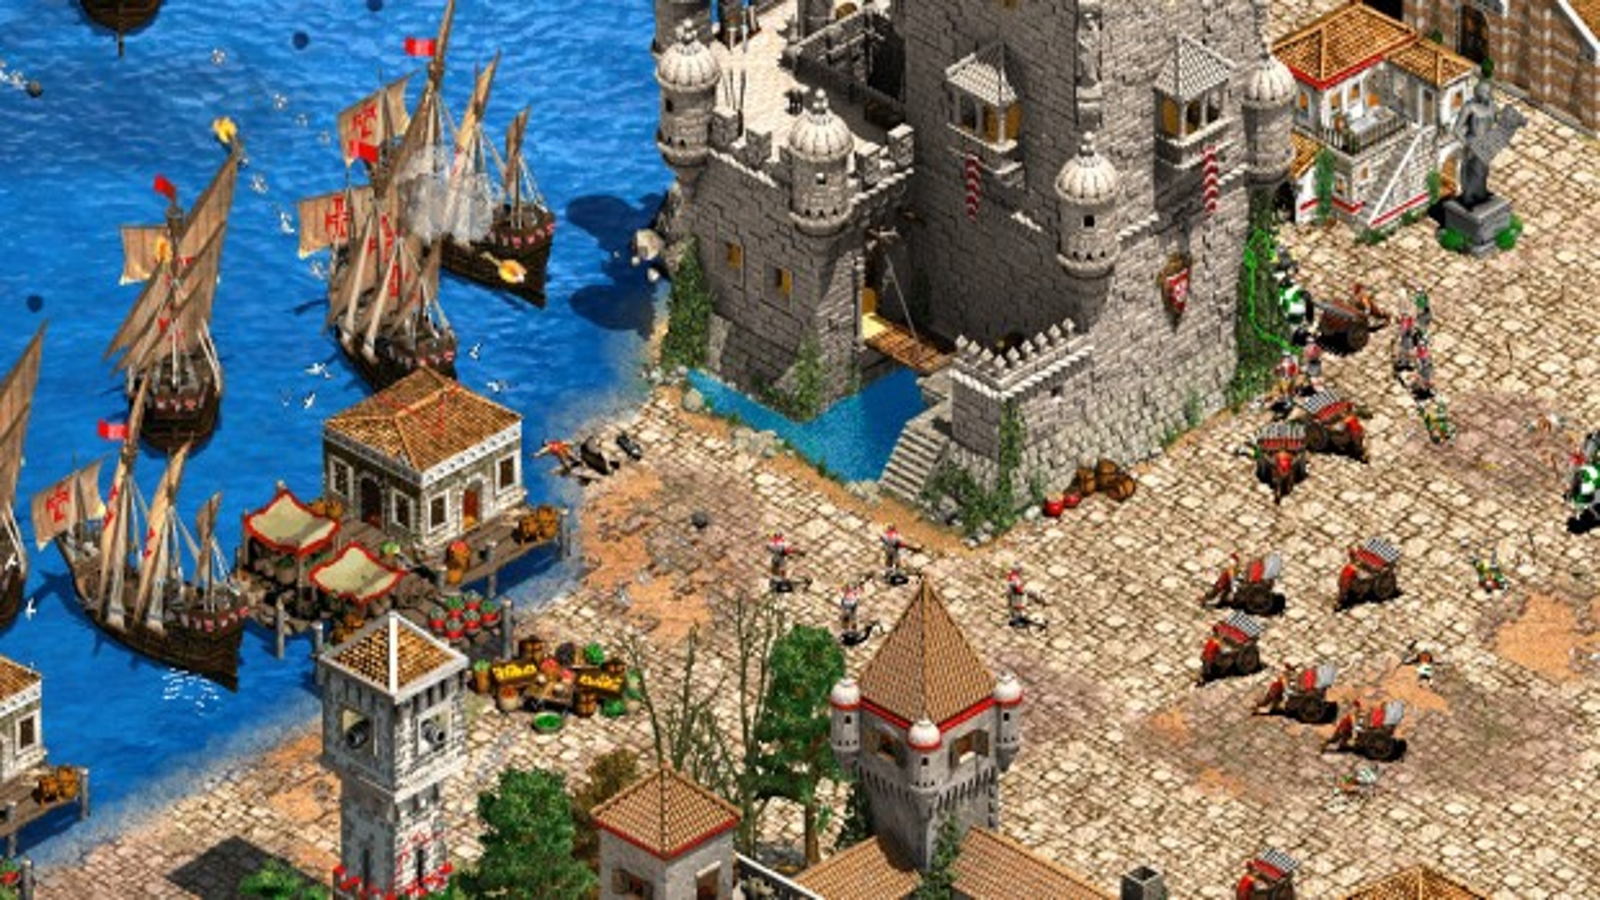 Mods to Age-Up Your Age of Empires II Gameplay! - Age of Empires